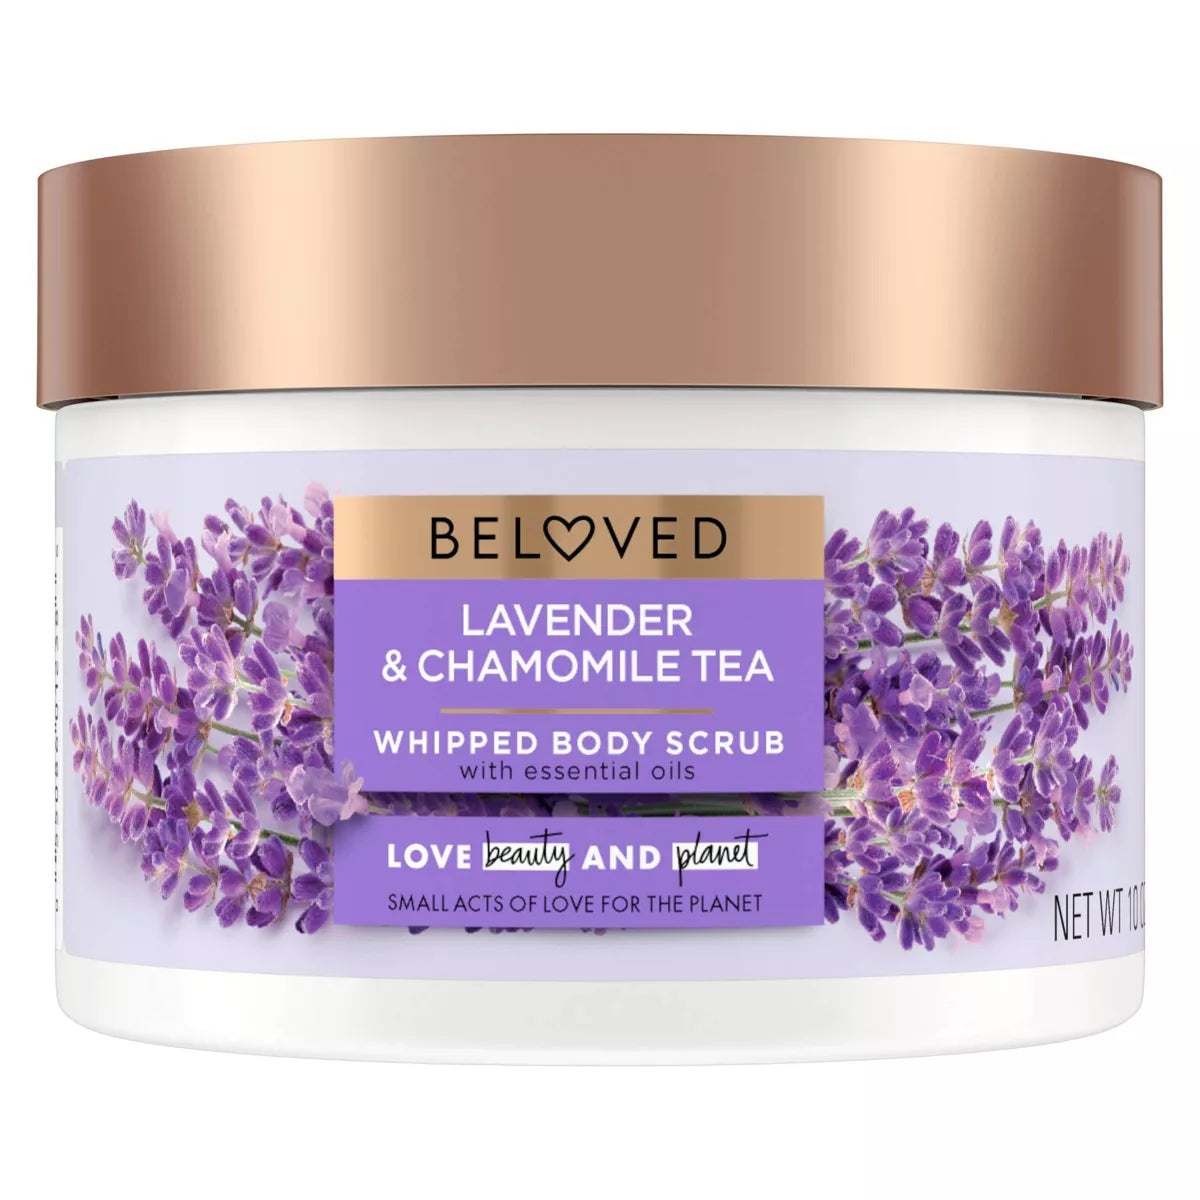 Beloved Lavender and Chamomile Tea Whipped Body Scrub - 10oz